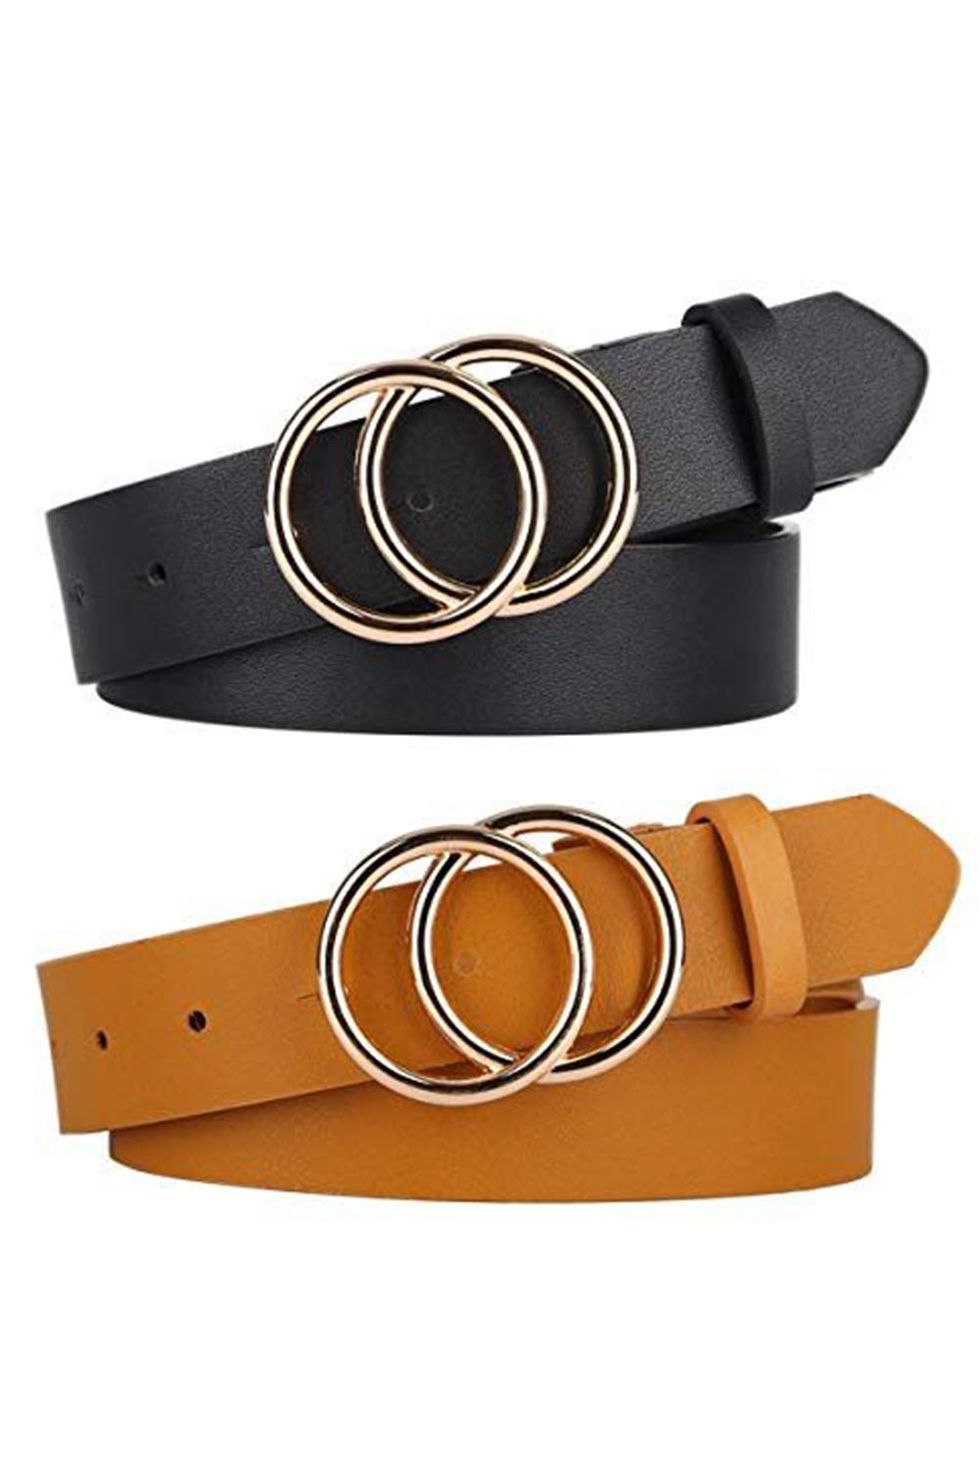 UnFader 2 Pieces Women Belt Belt for Jeans with Fashion Double O